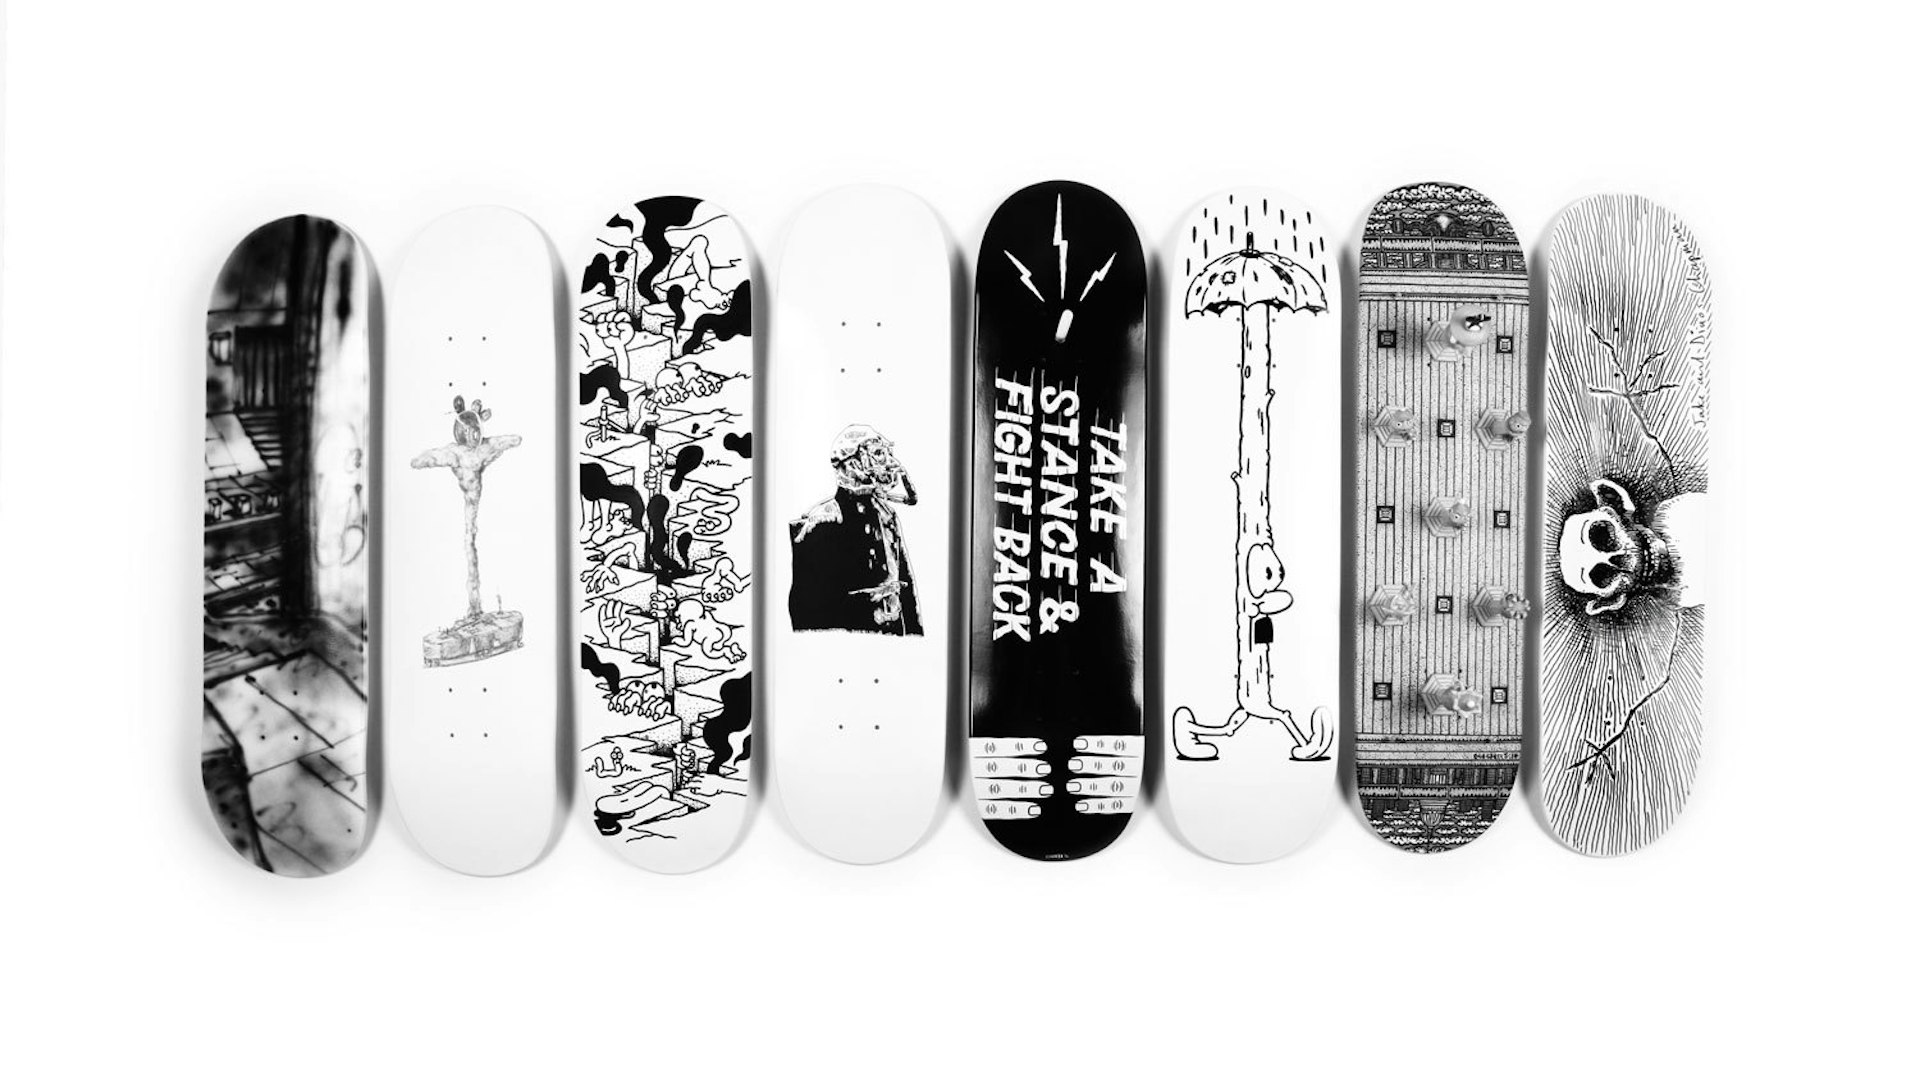 World-class artists render skateboards in black and white